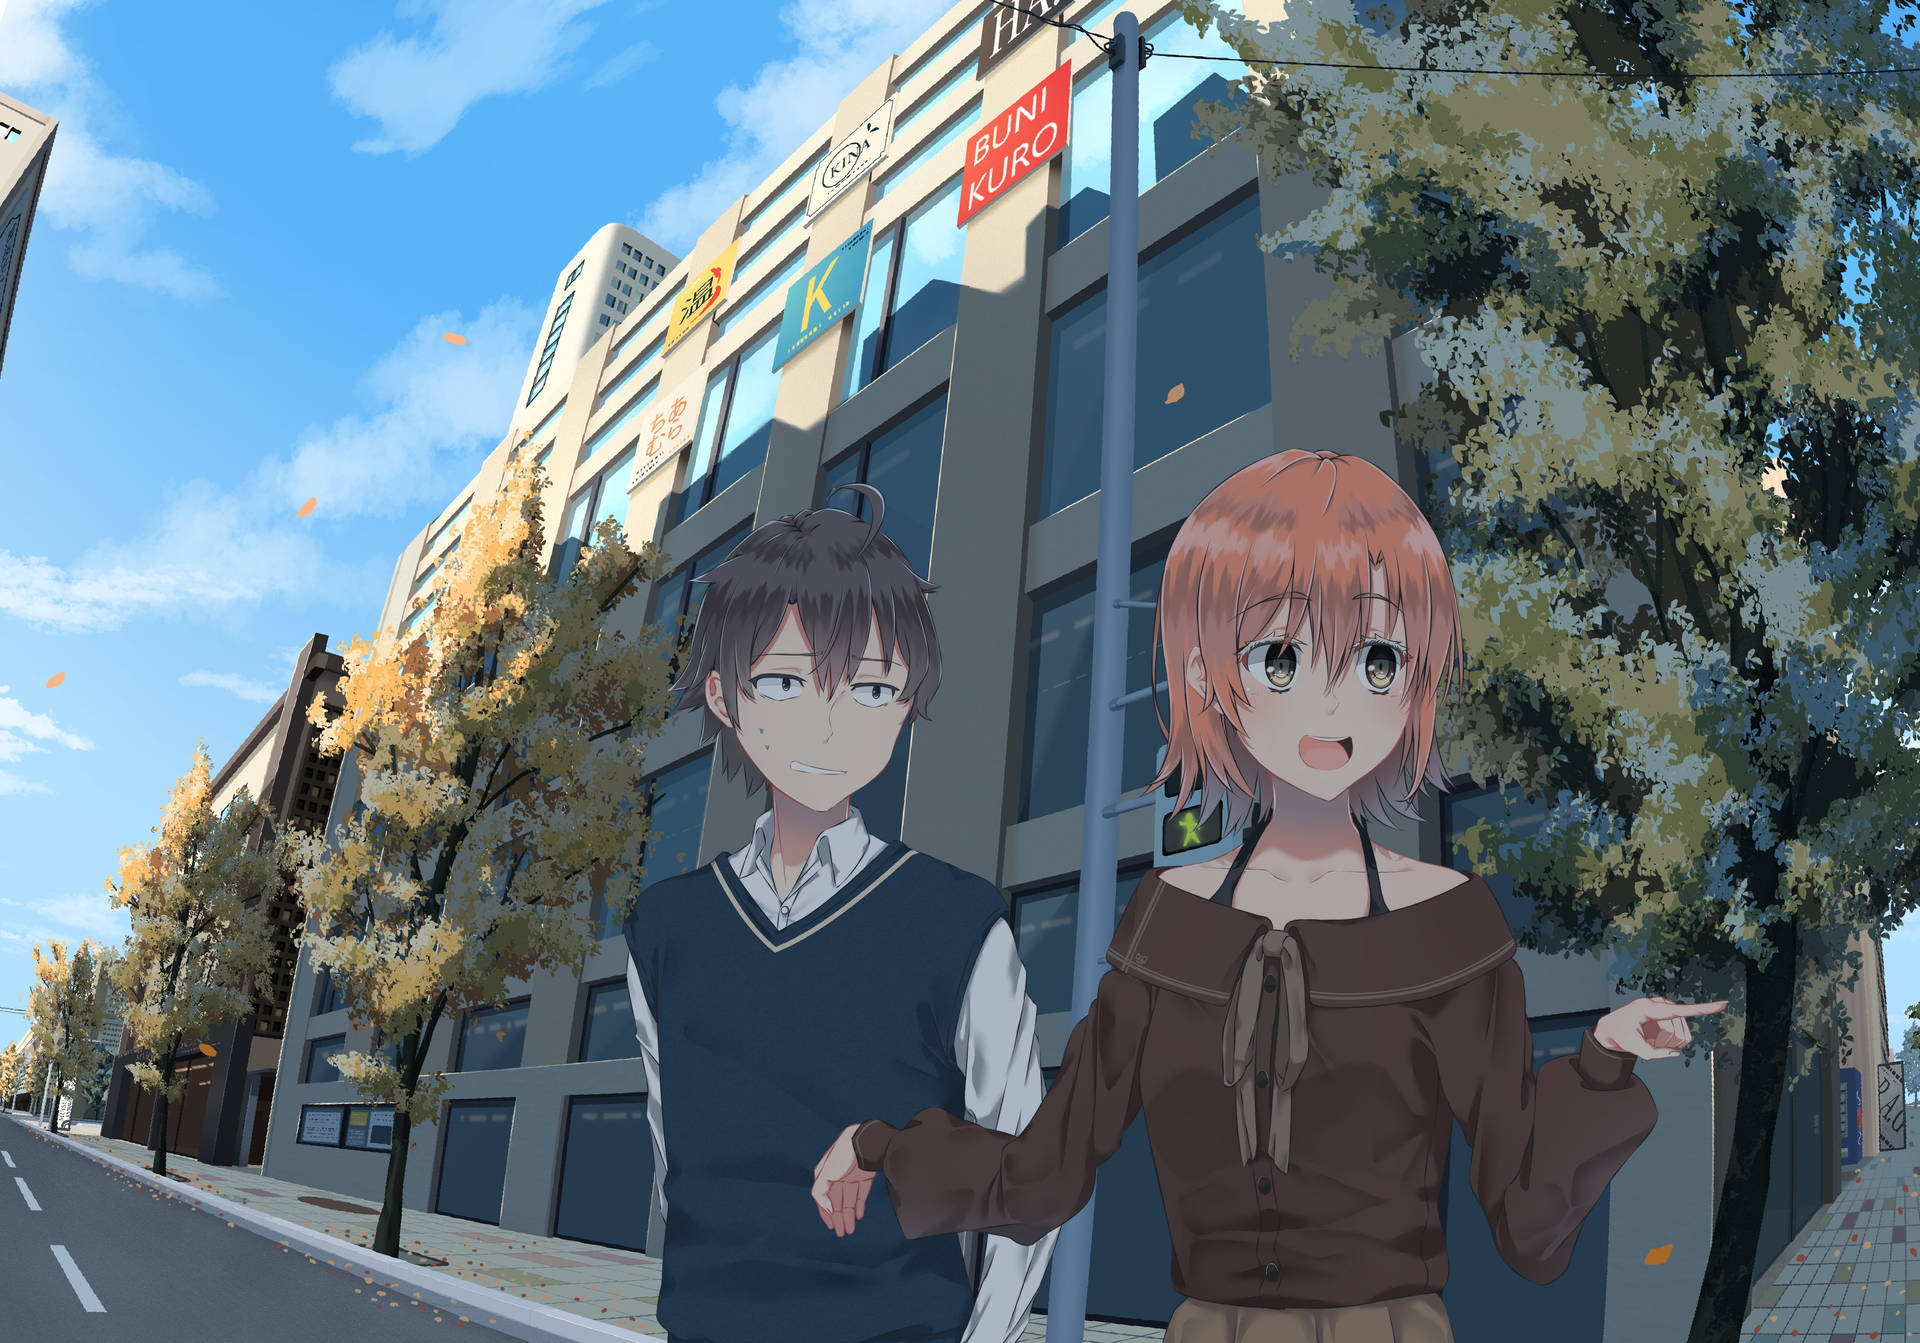 Cute Anime Couple In The City